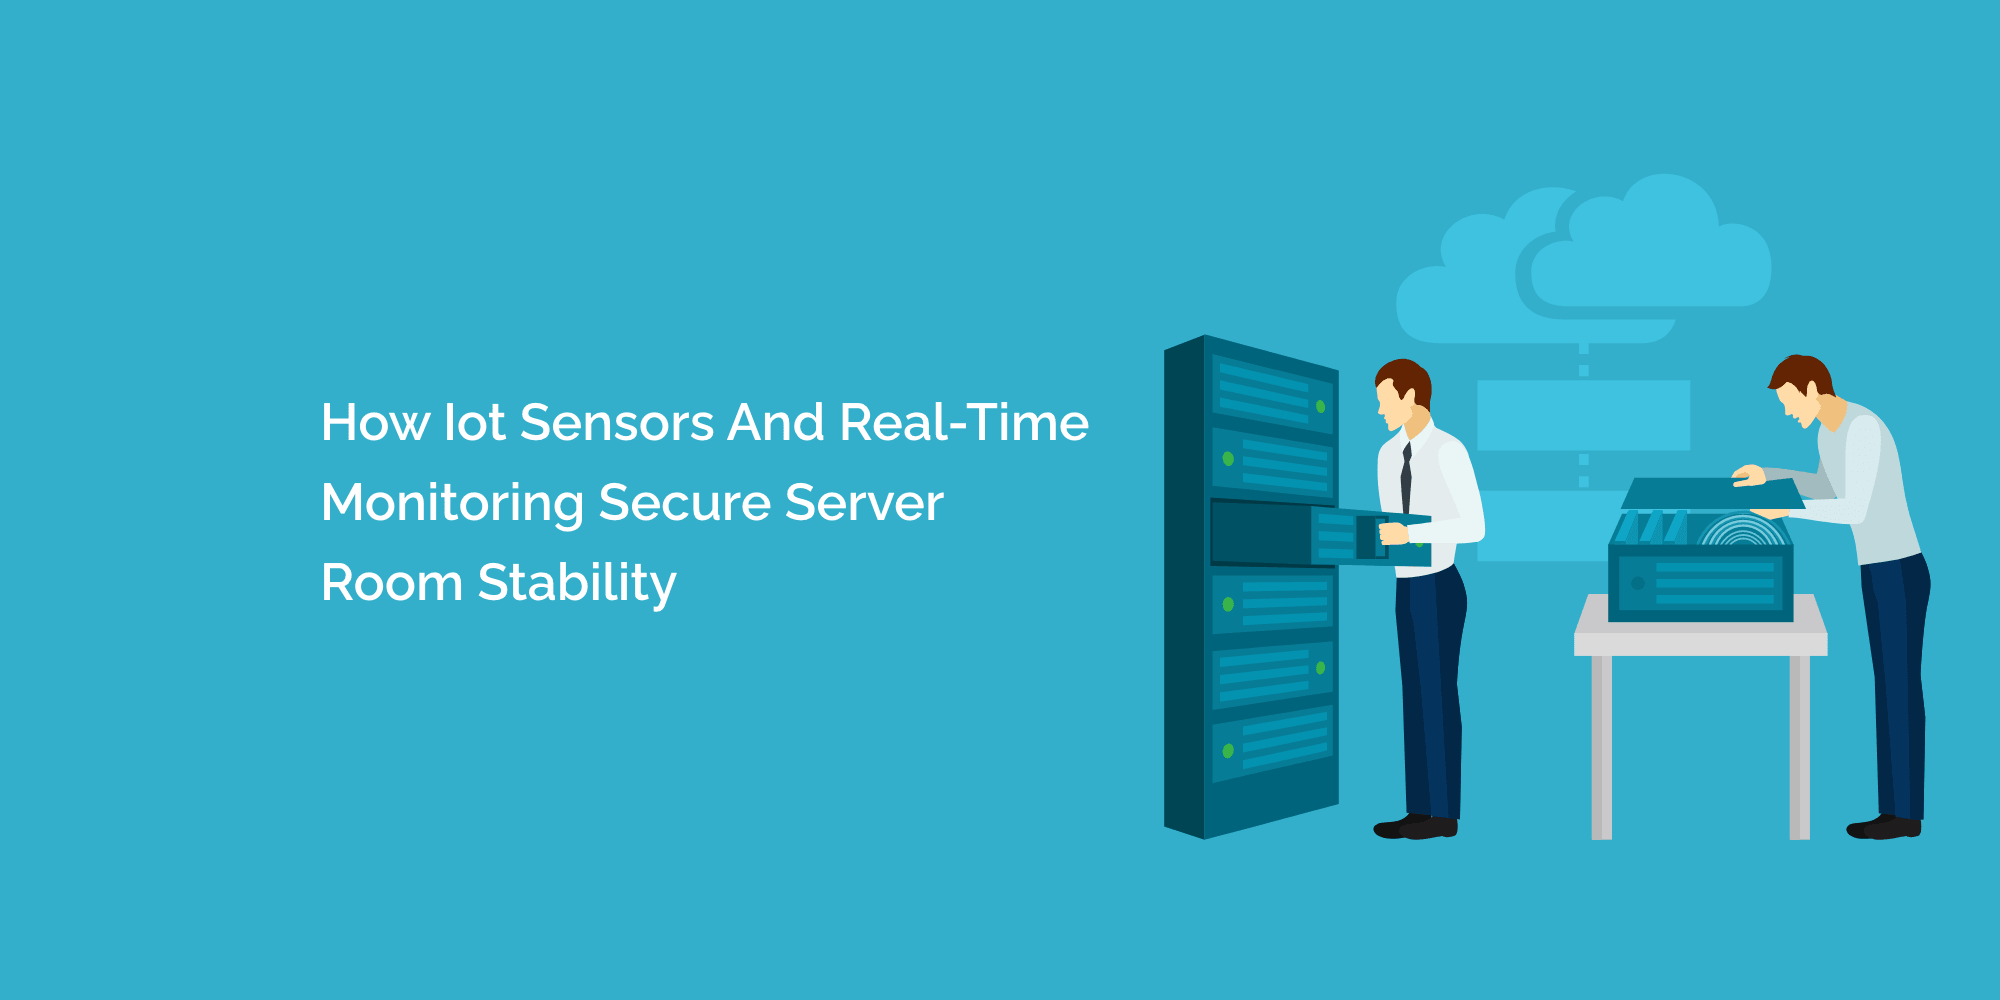 How IoT Sensors and Real-Time Monitoring Secure Server Room Stability